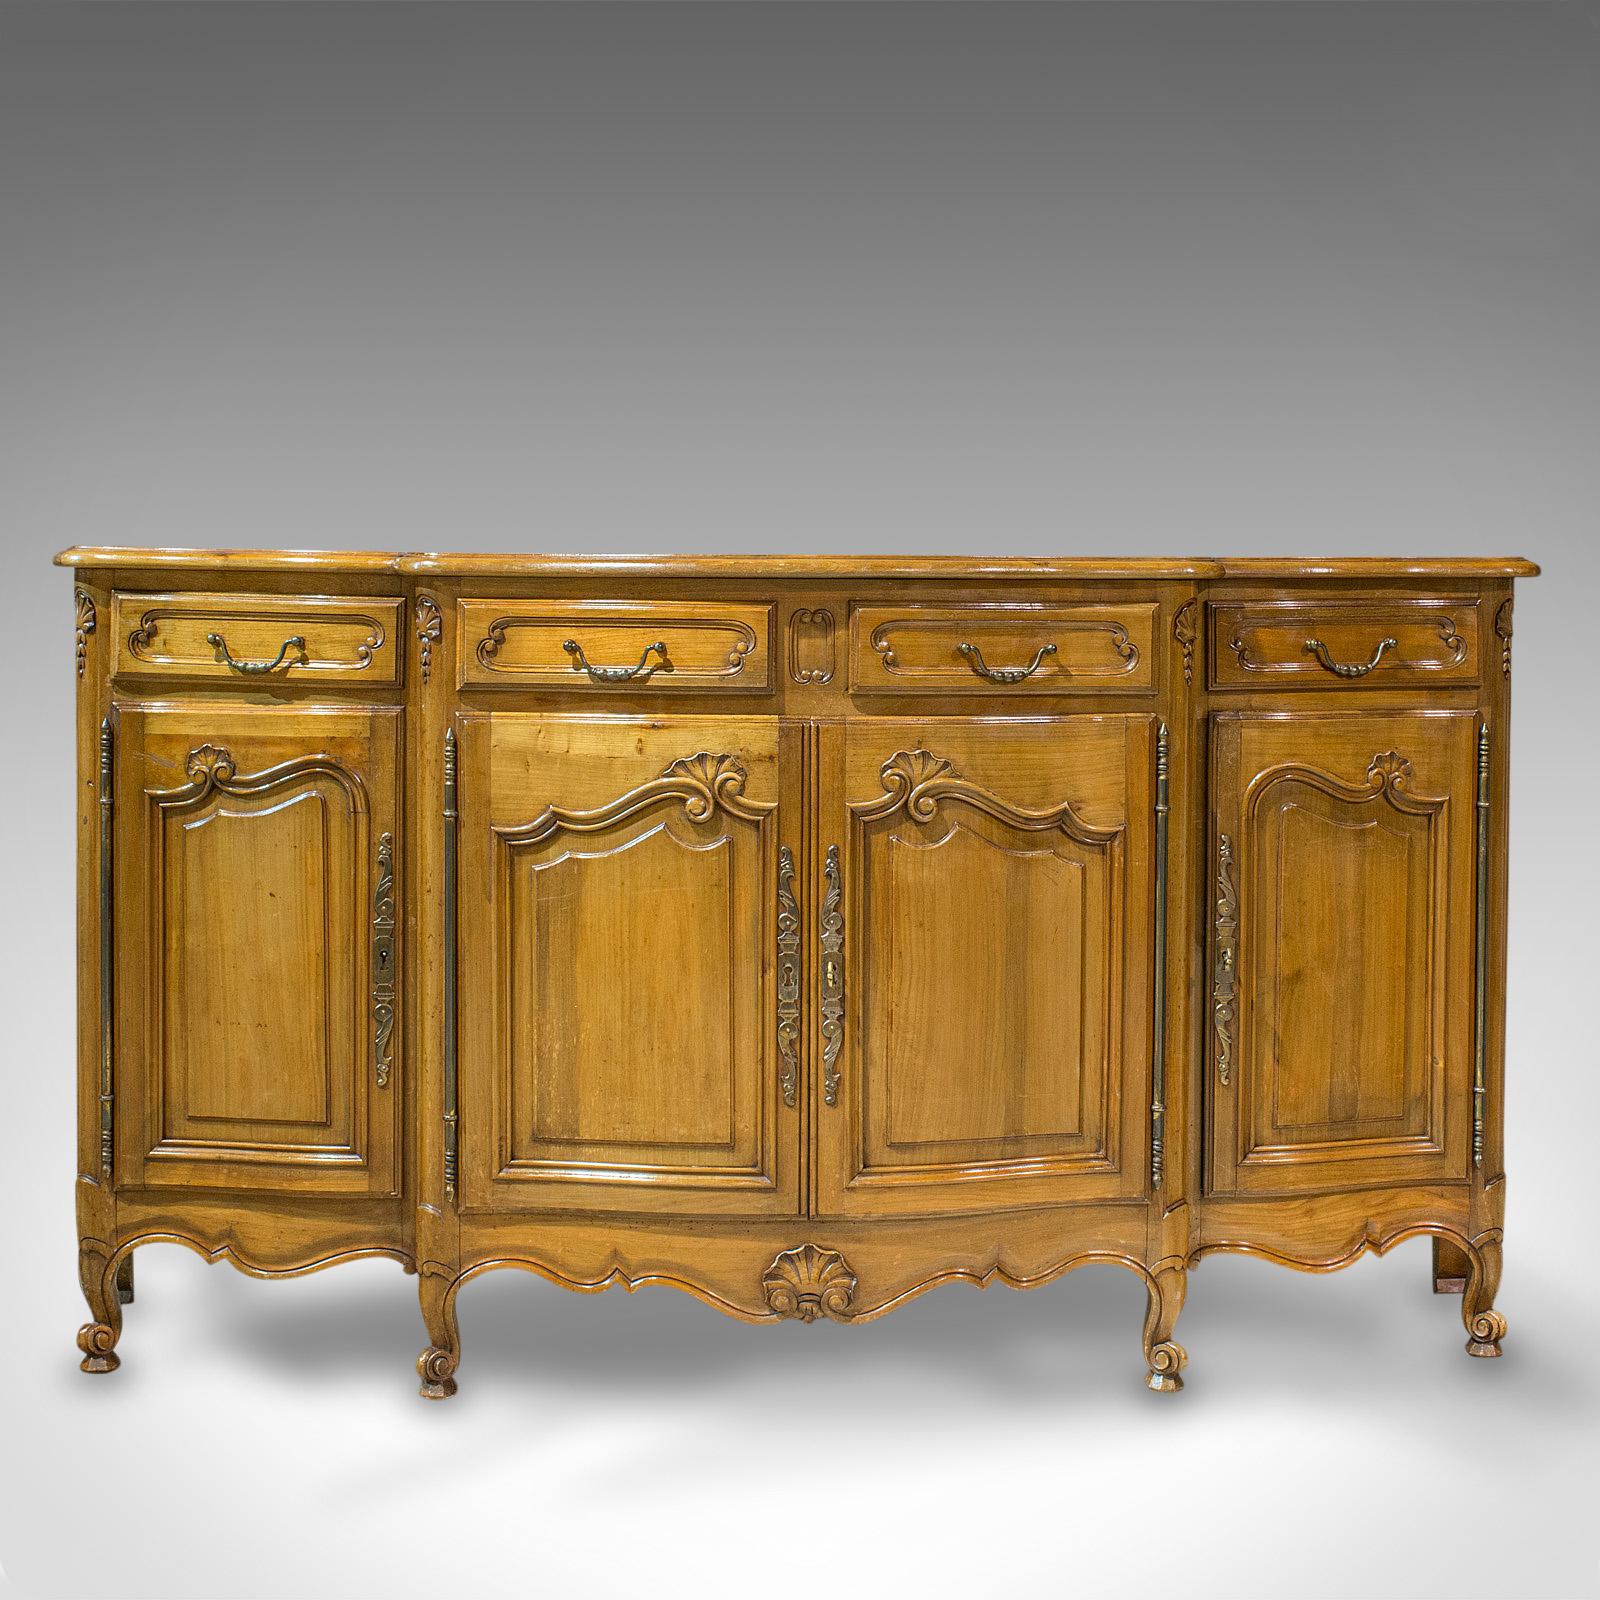 This is a vintage bow-front dresser. A French, walnut Provincial sideboard, dating to the early 20th century, circa 1930.

Dresser steeped in Provincial appeal
Displays a desirable aged patina
Attractive walnut displays fine grain